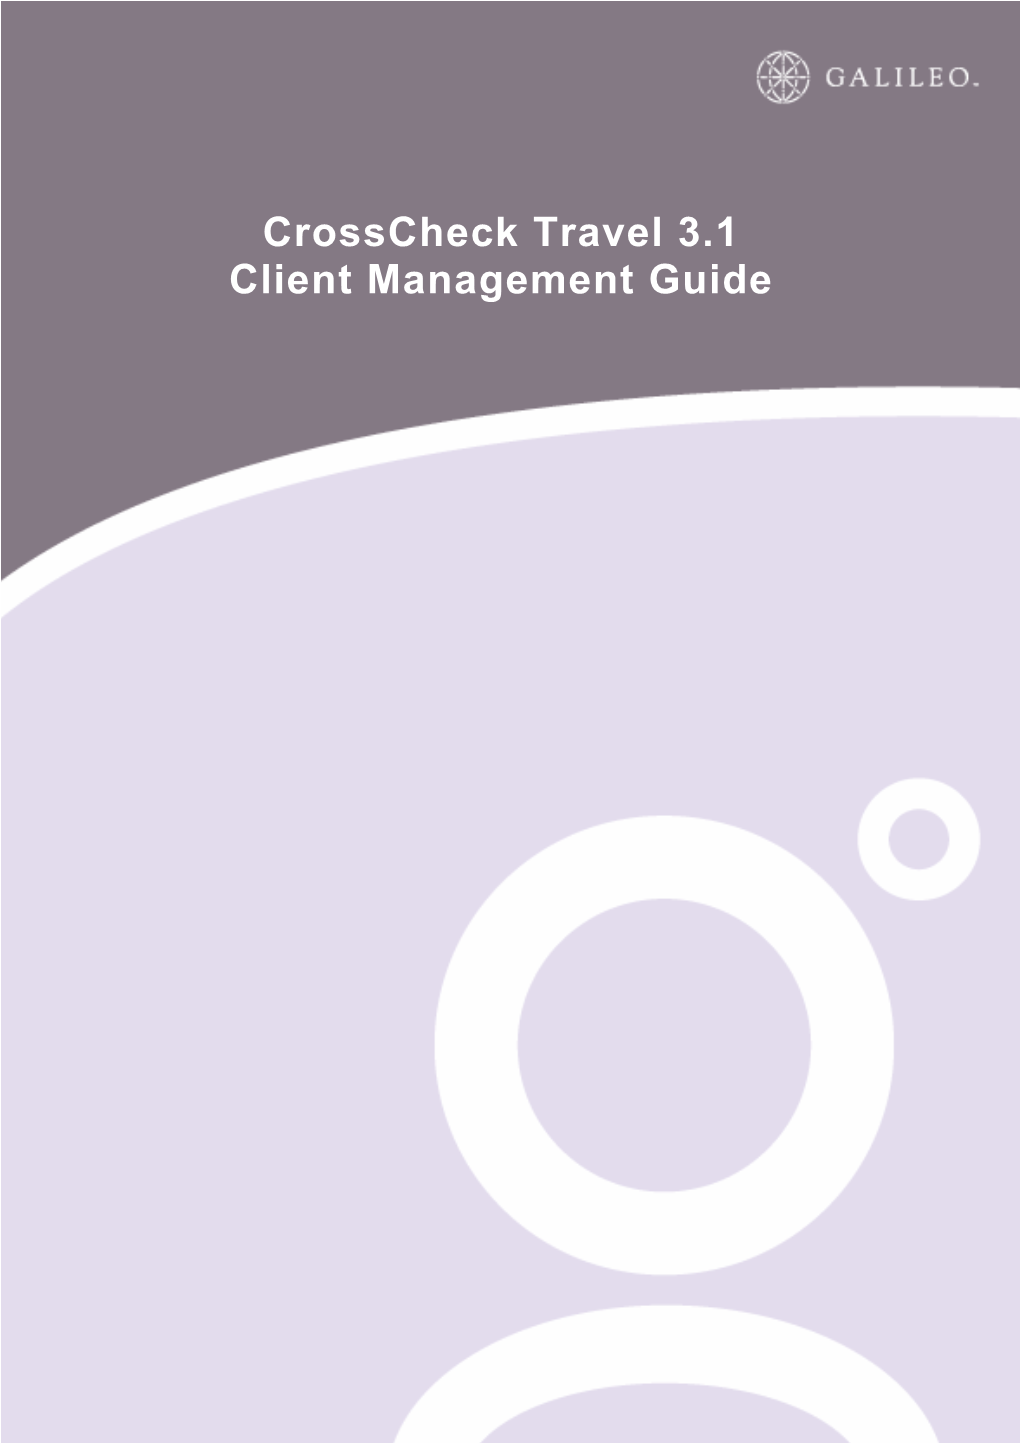 Crosscheck Travel 3.1 Client Management Guide INTRODUCTION 7 Welcome